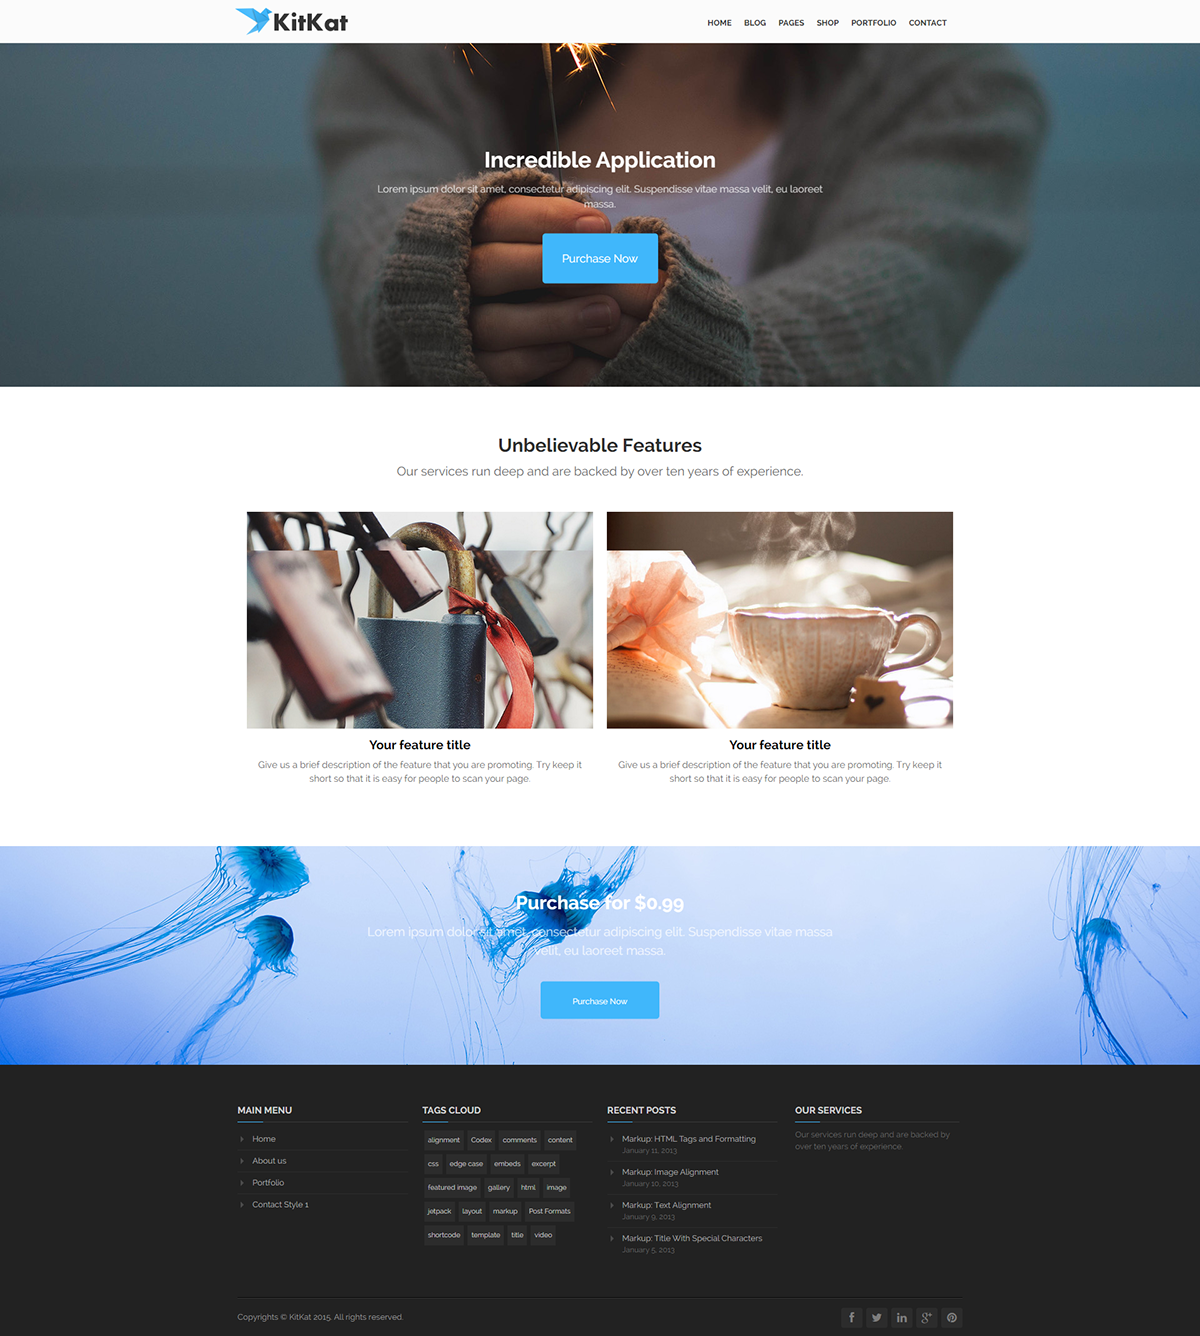 bussiness layerswp Style Kit corporate wordpress site templates portfolio shop Woocommerce Multipurpose One Page Responsive bootstrap seo ready